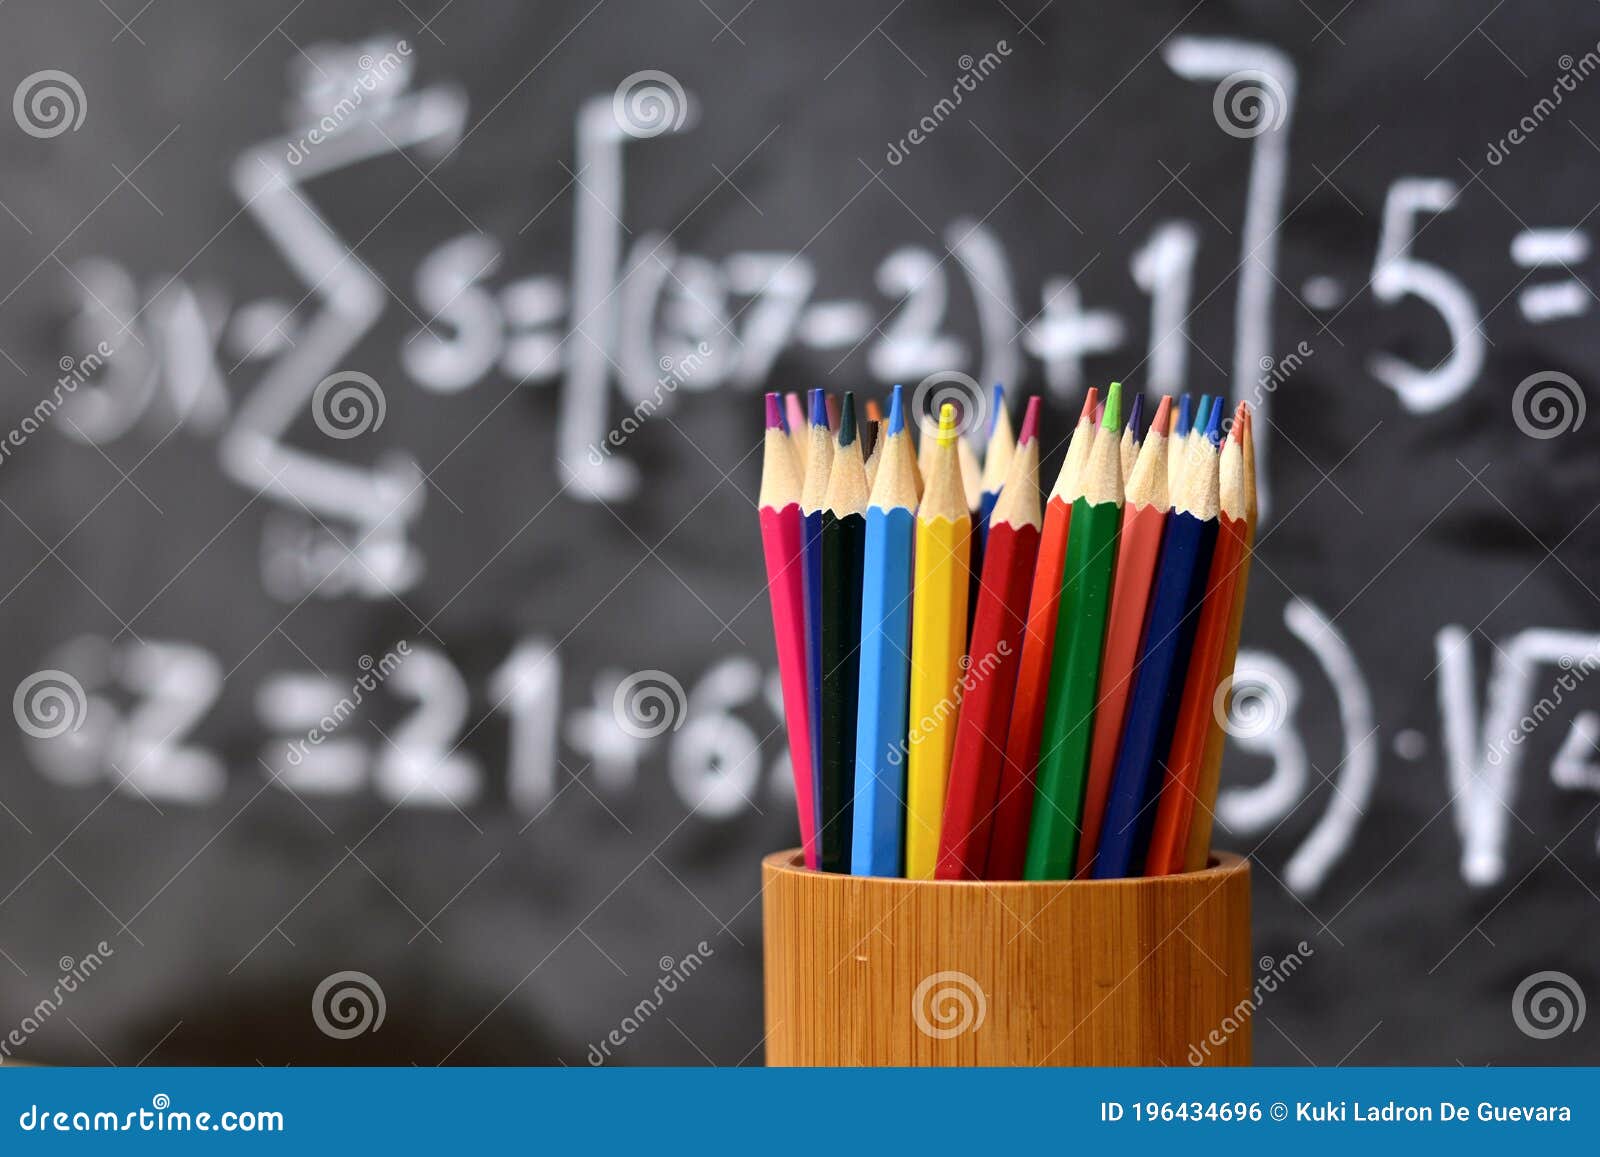 colored pencils with blackboard background